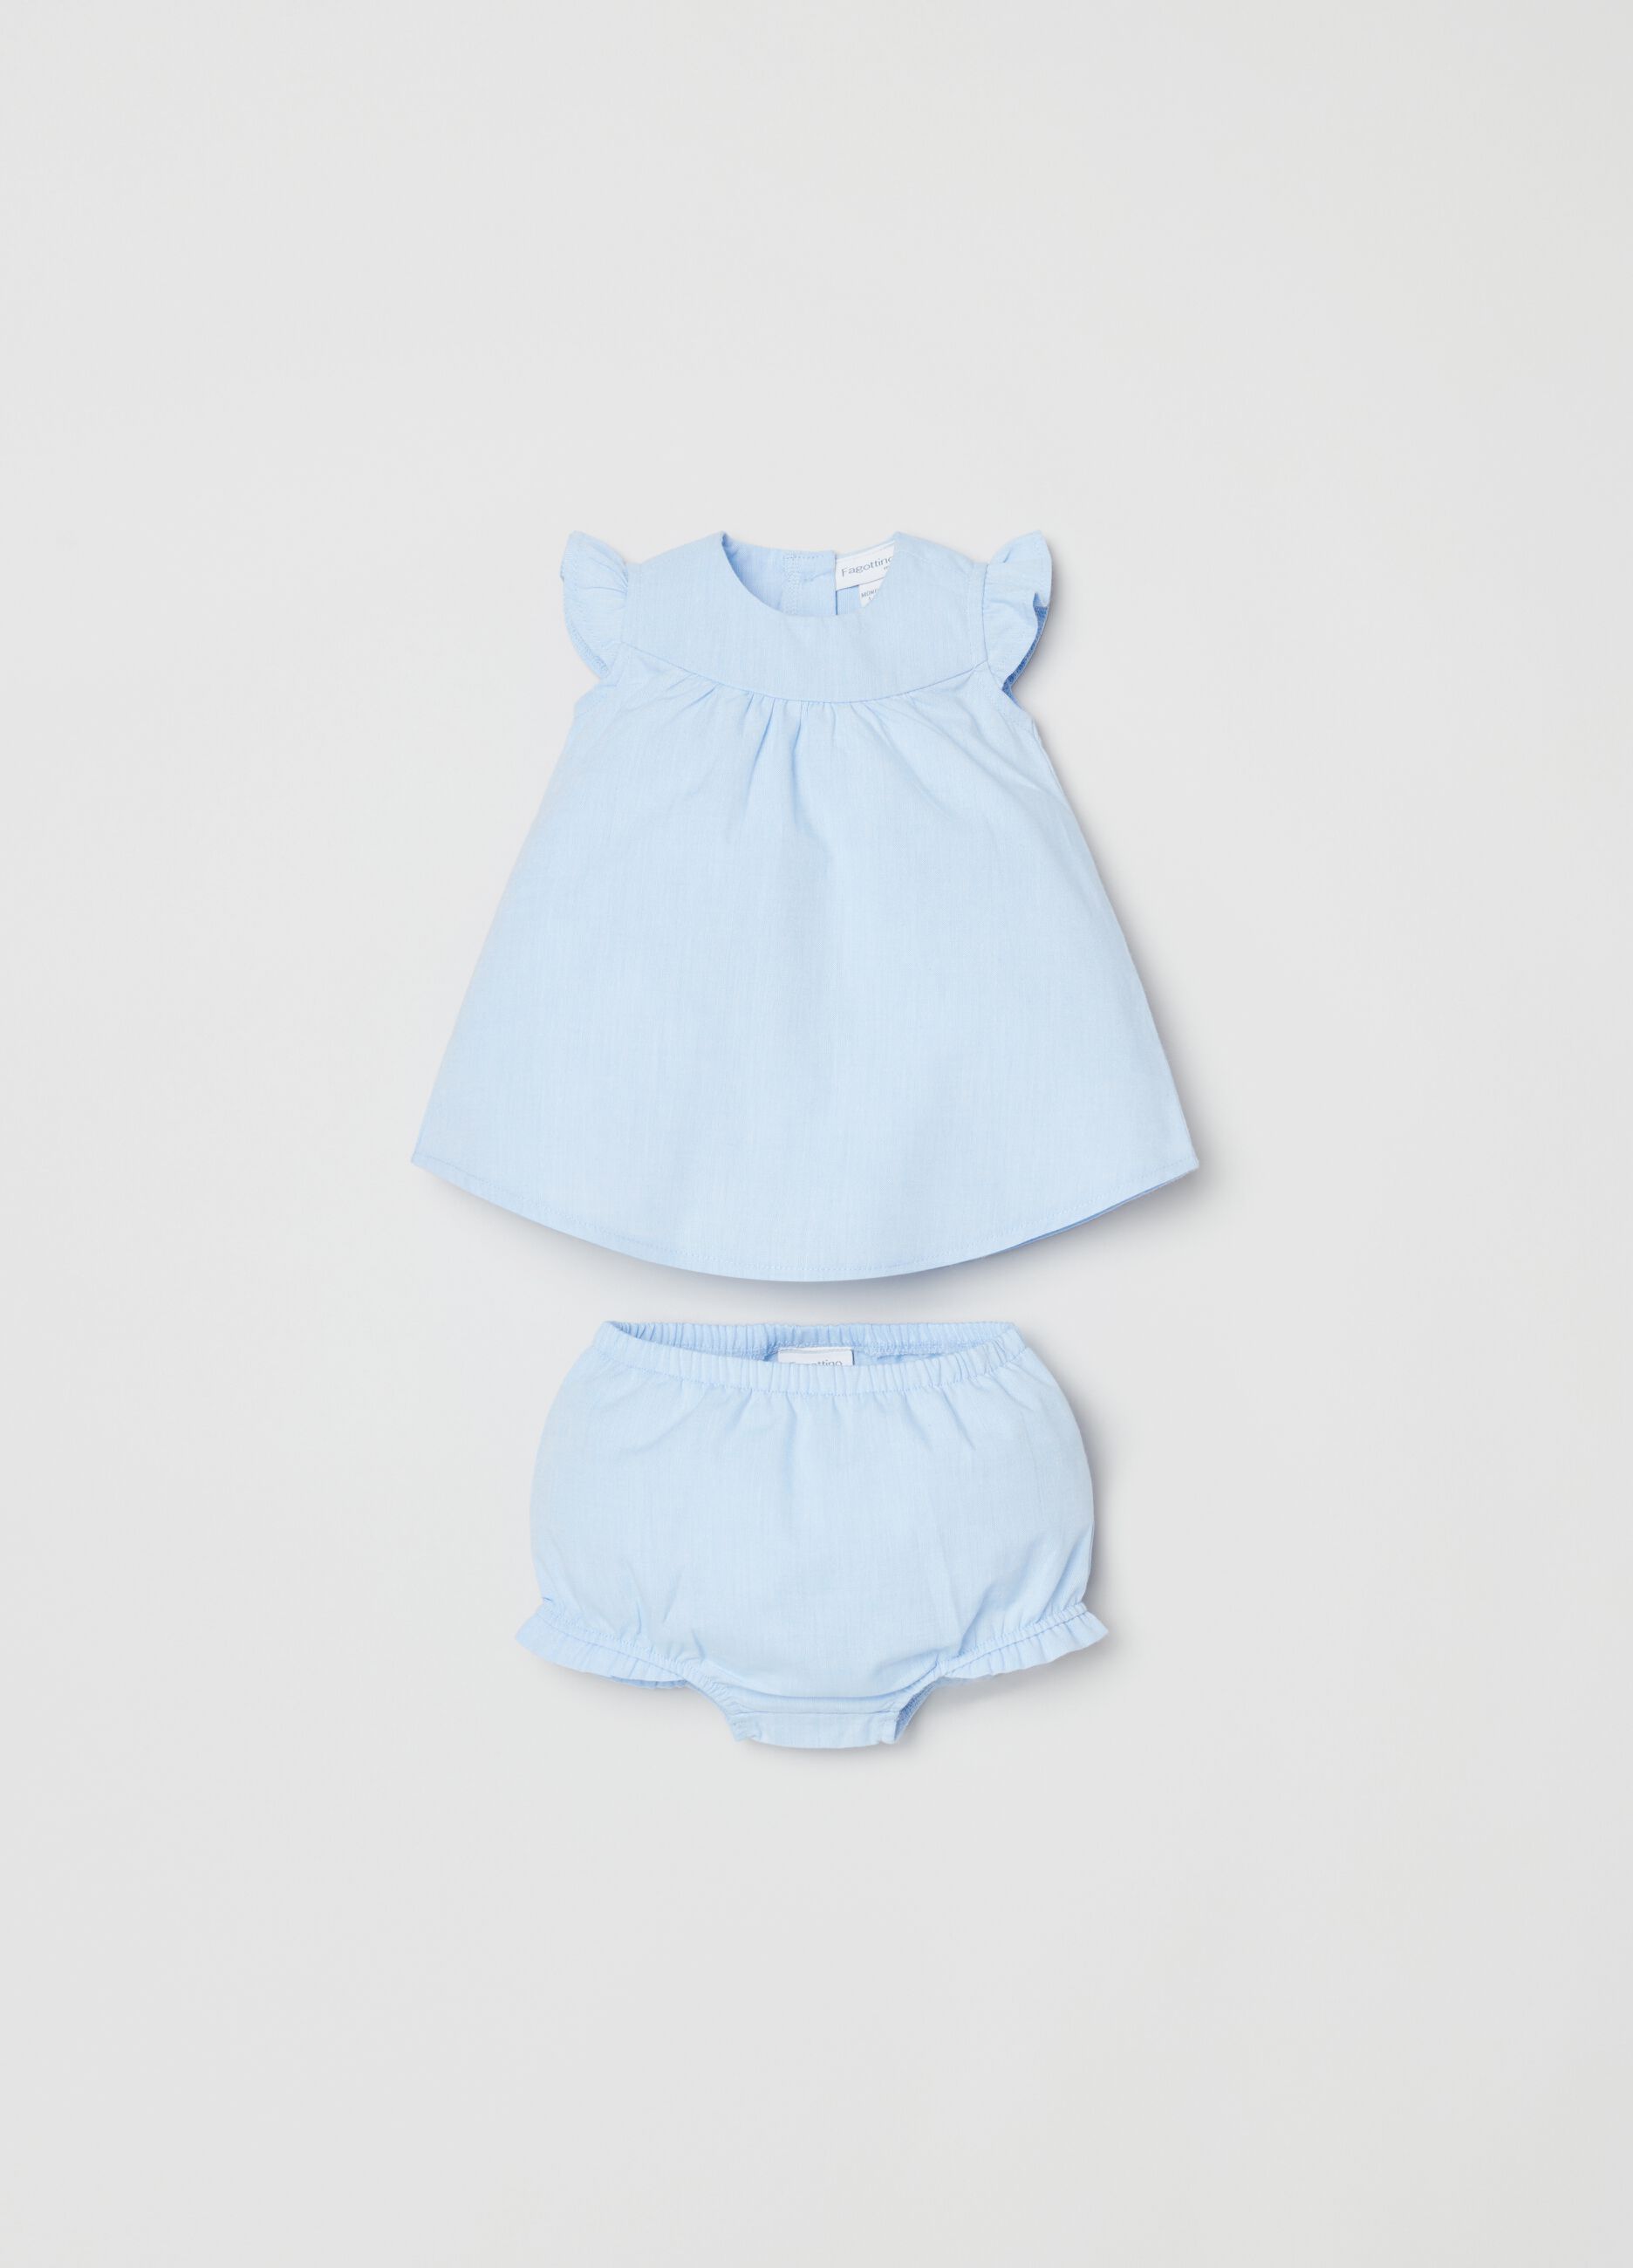 Dress and briefs set with ruffles